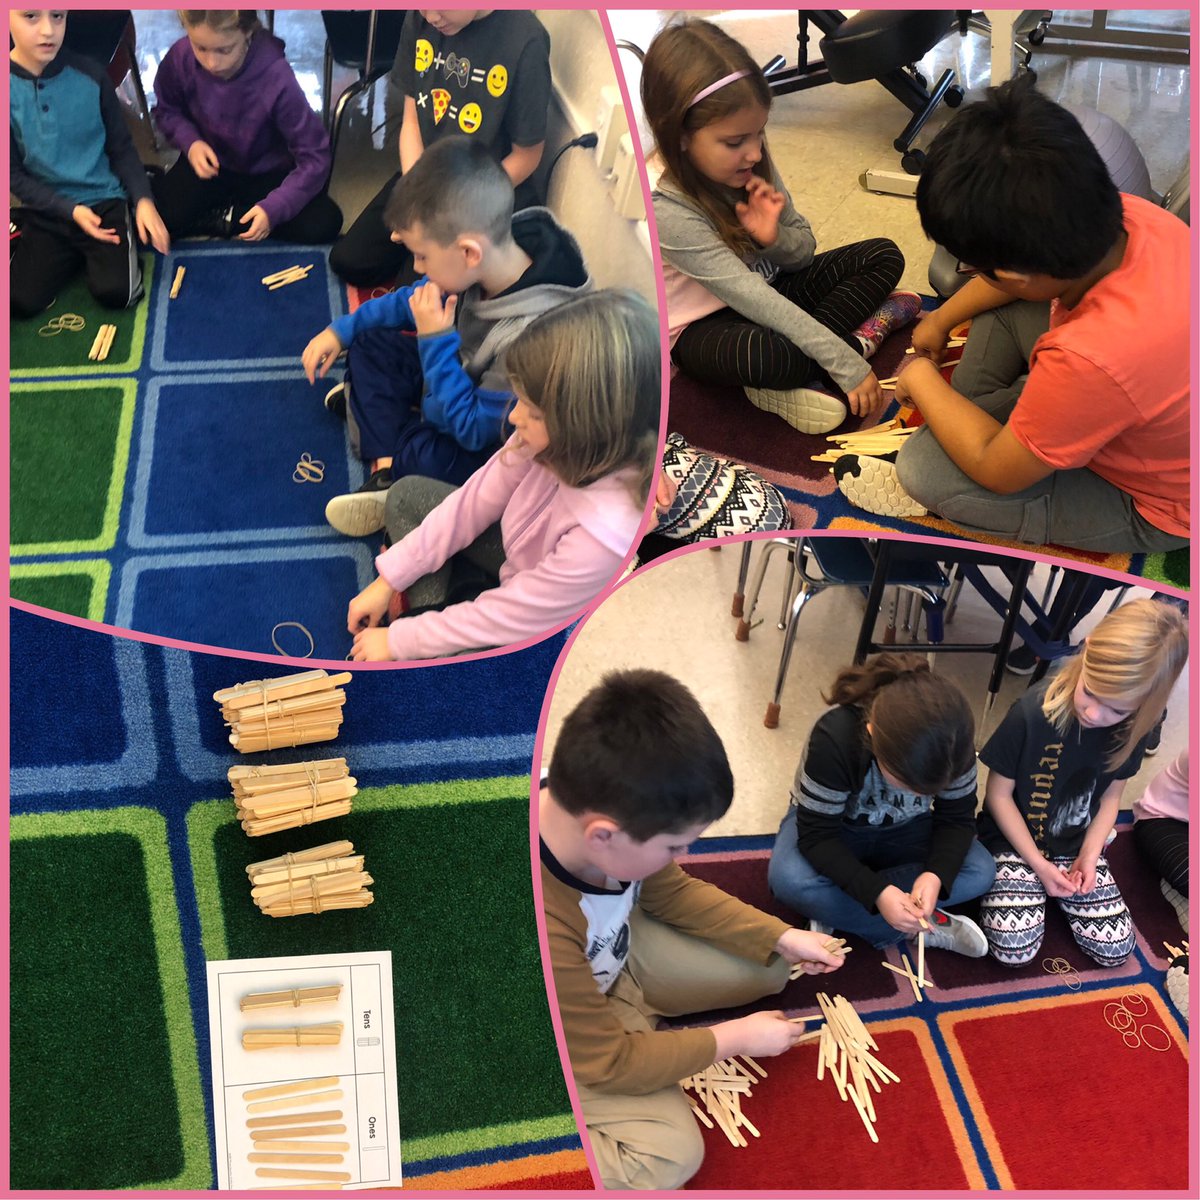 Ss @StallBrookBPS are learning place value, working with hundreds tens and ones! We estimated the amount of sticks in the bucket, then went to work finding out the answer. Ss bundled groups of 10 sticks and then 100 sticks. Our total? 327! #bellinghamps #handsonlearning